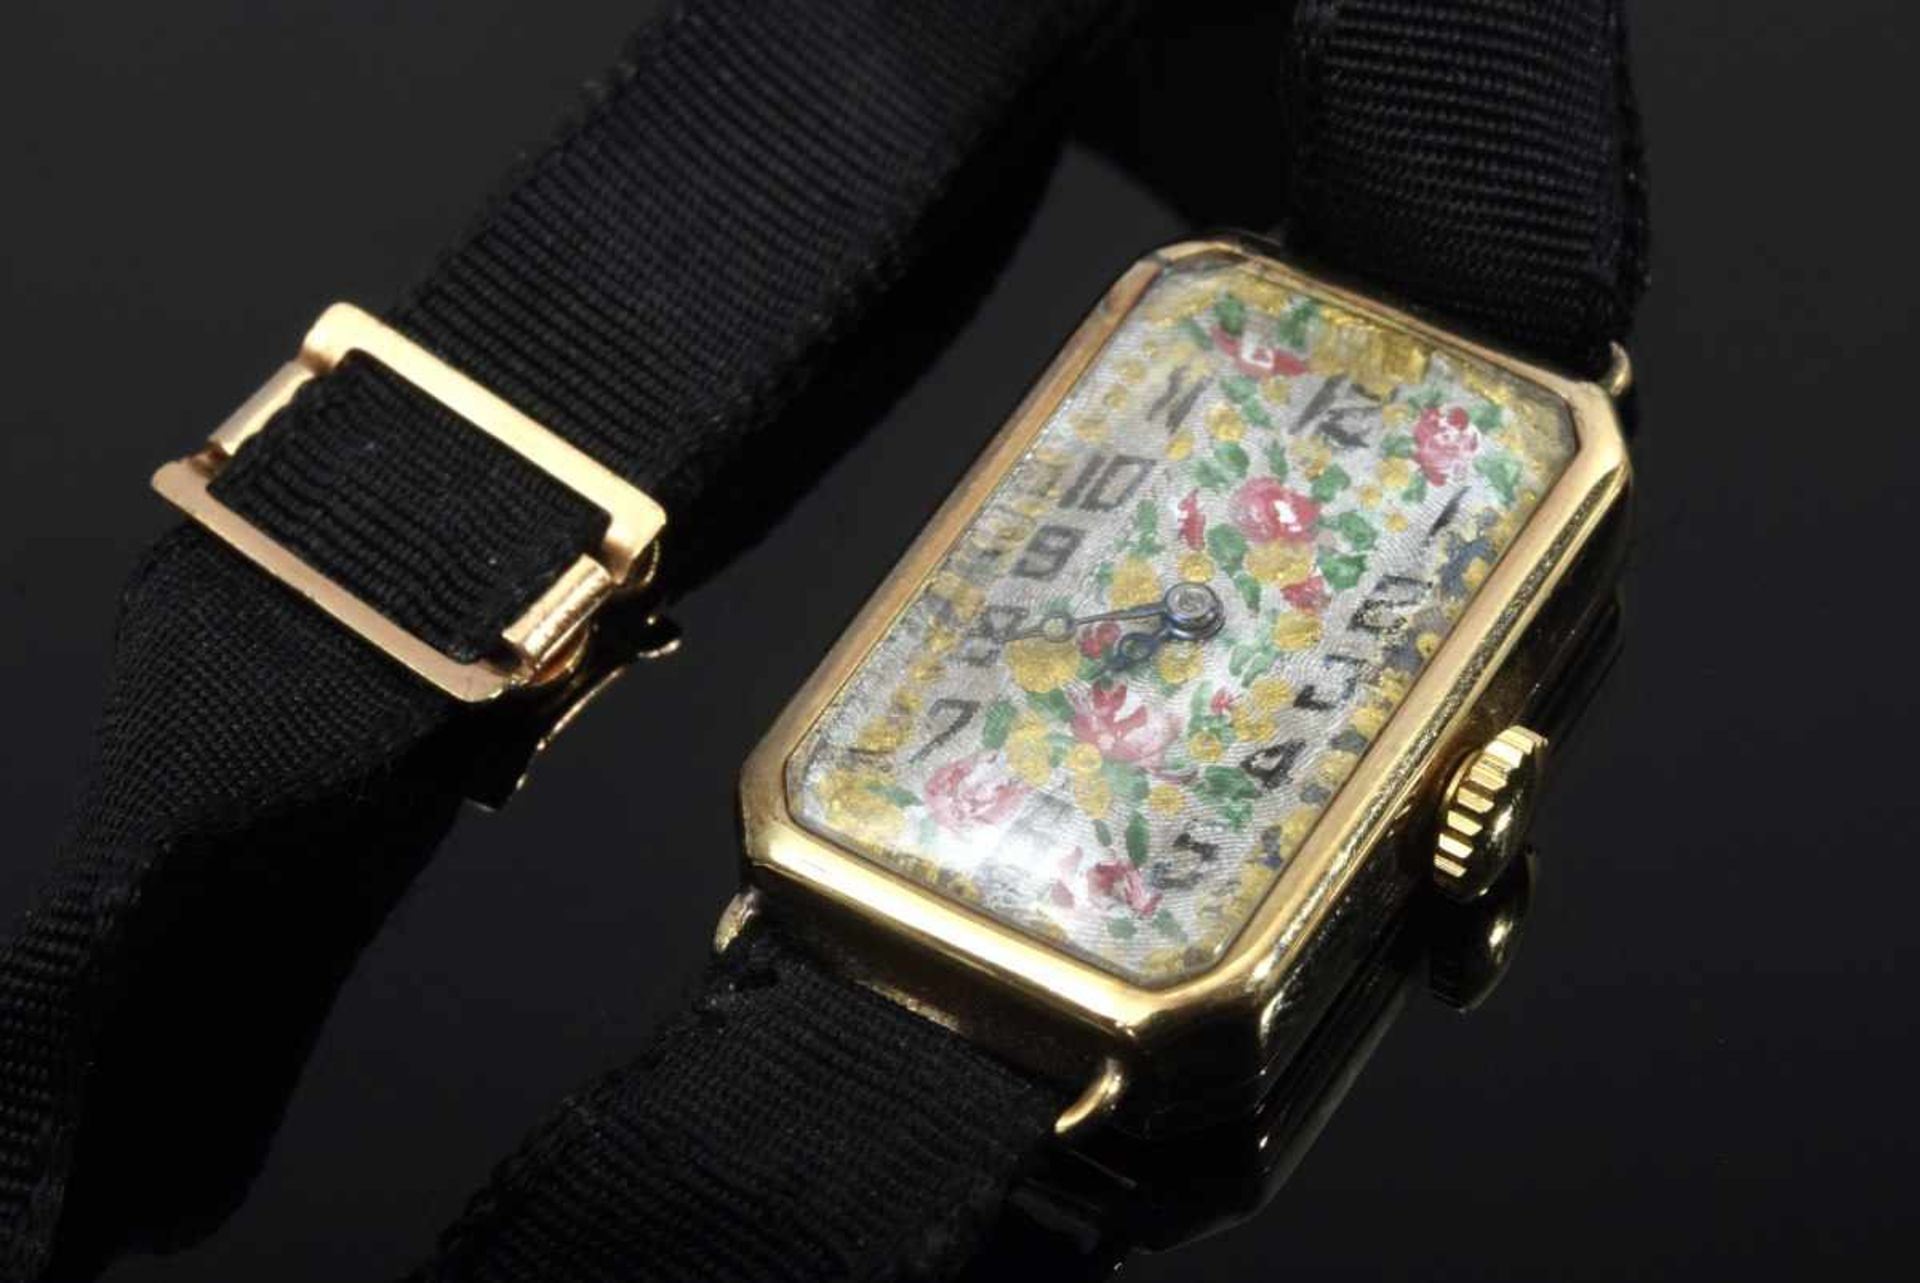 Art Deco RG 375 ladies' watch with floral painted silver dial, black ribbed strap and gold-plated - Image 3 of 3